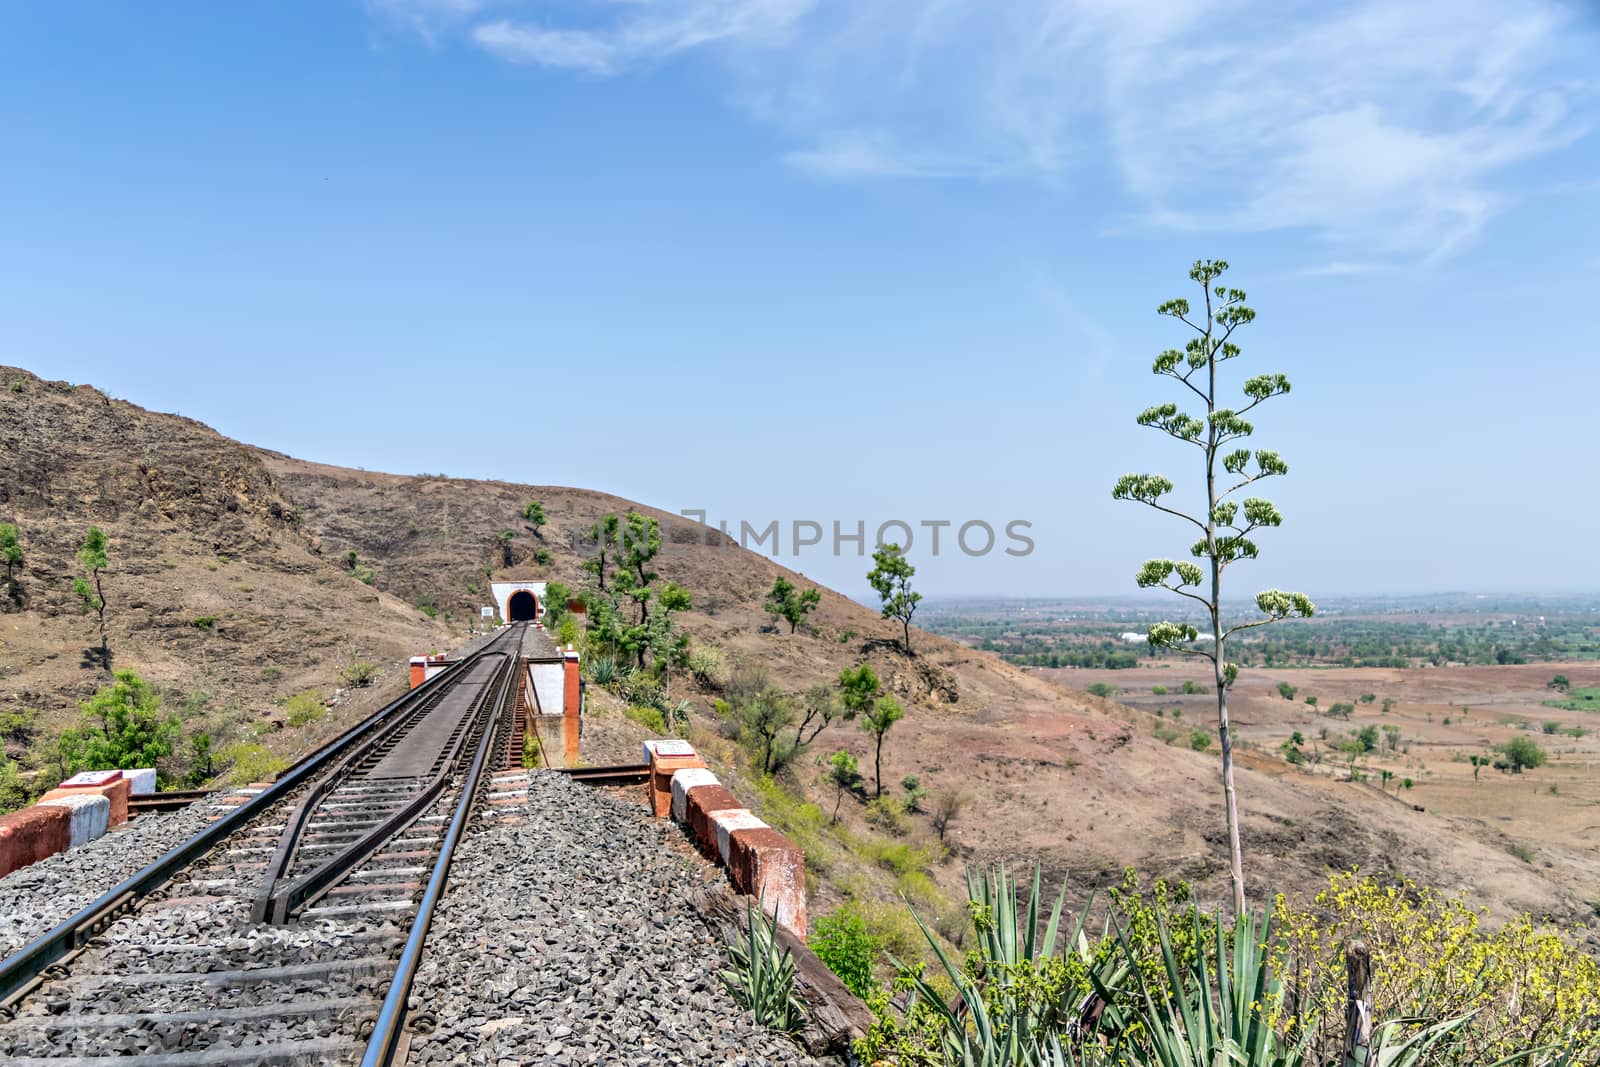 Single line railway track passing over bridge to enter a tunnel with Agawe tree on side and clear blue sky background.